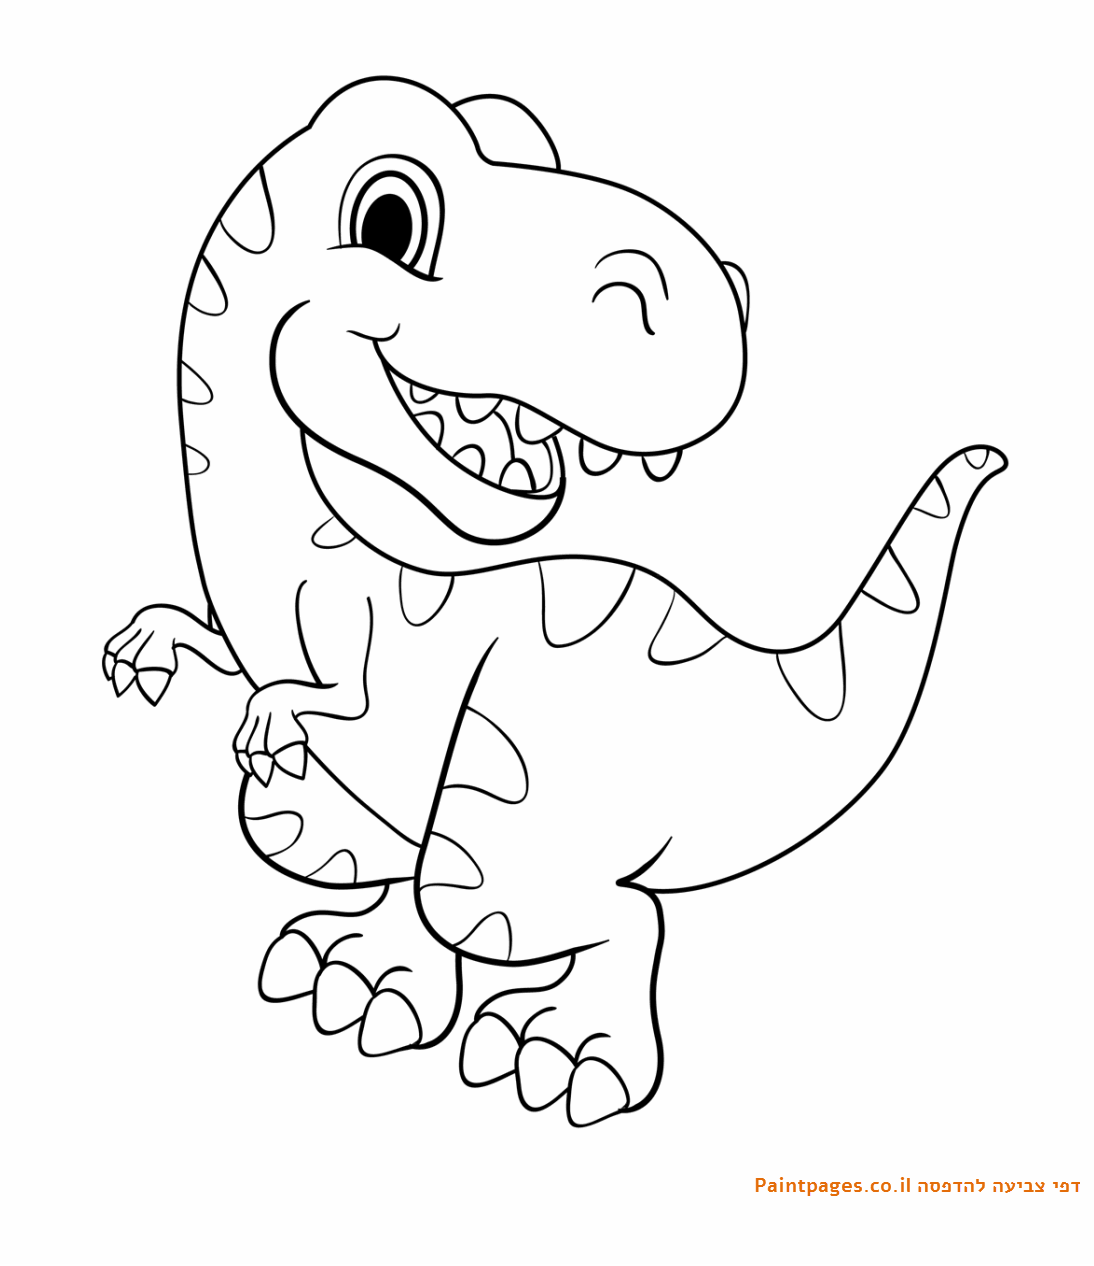 dinosaur color page dinosaur coloring pages free printable pictures coloring color page dinosaur 